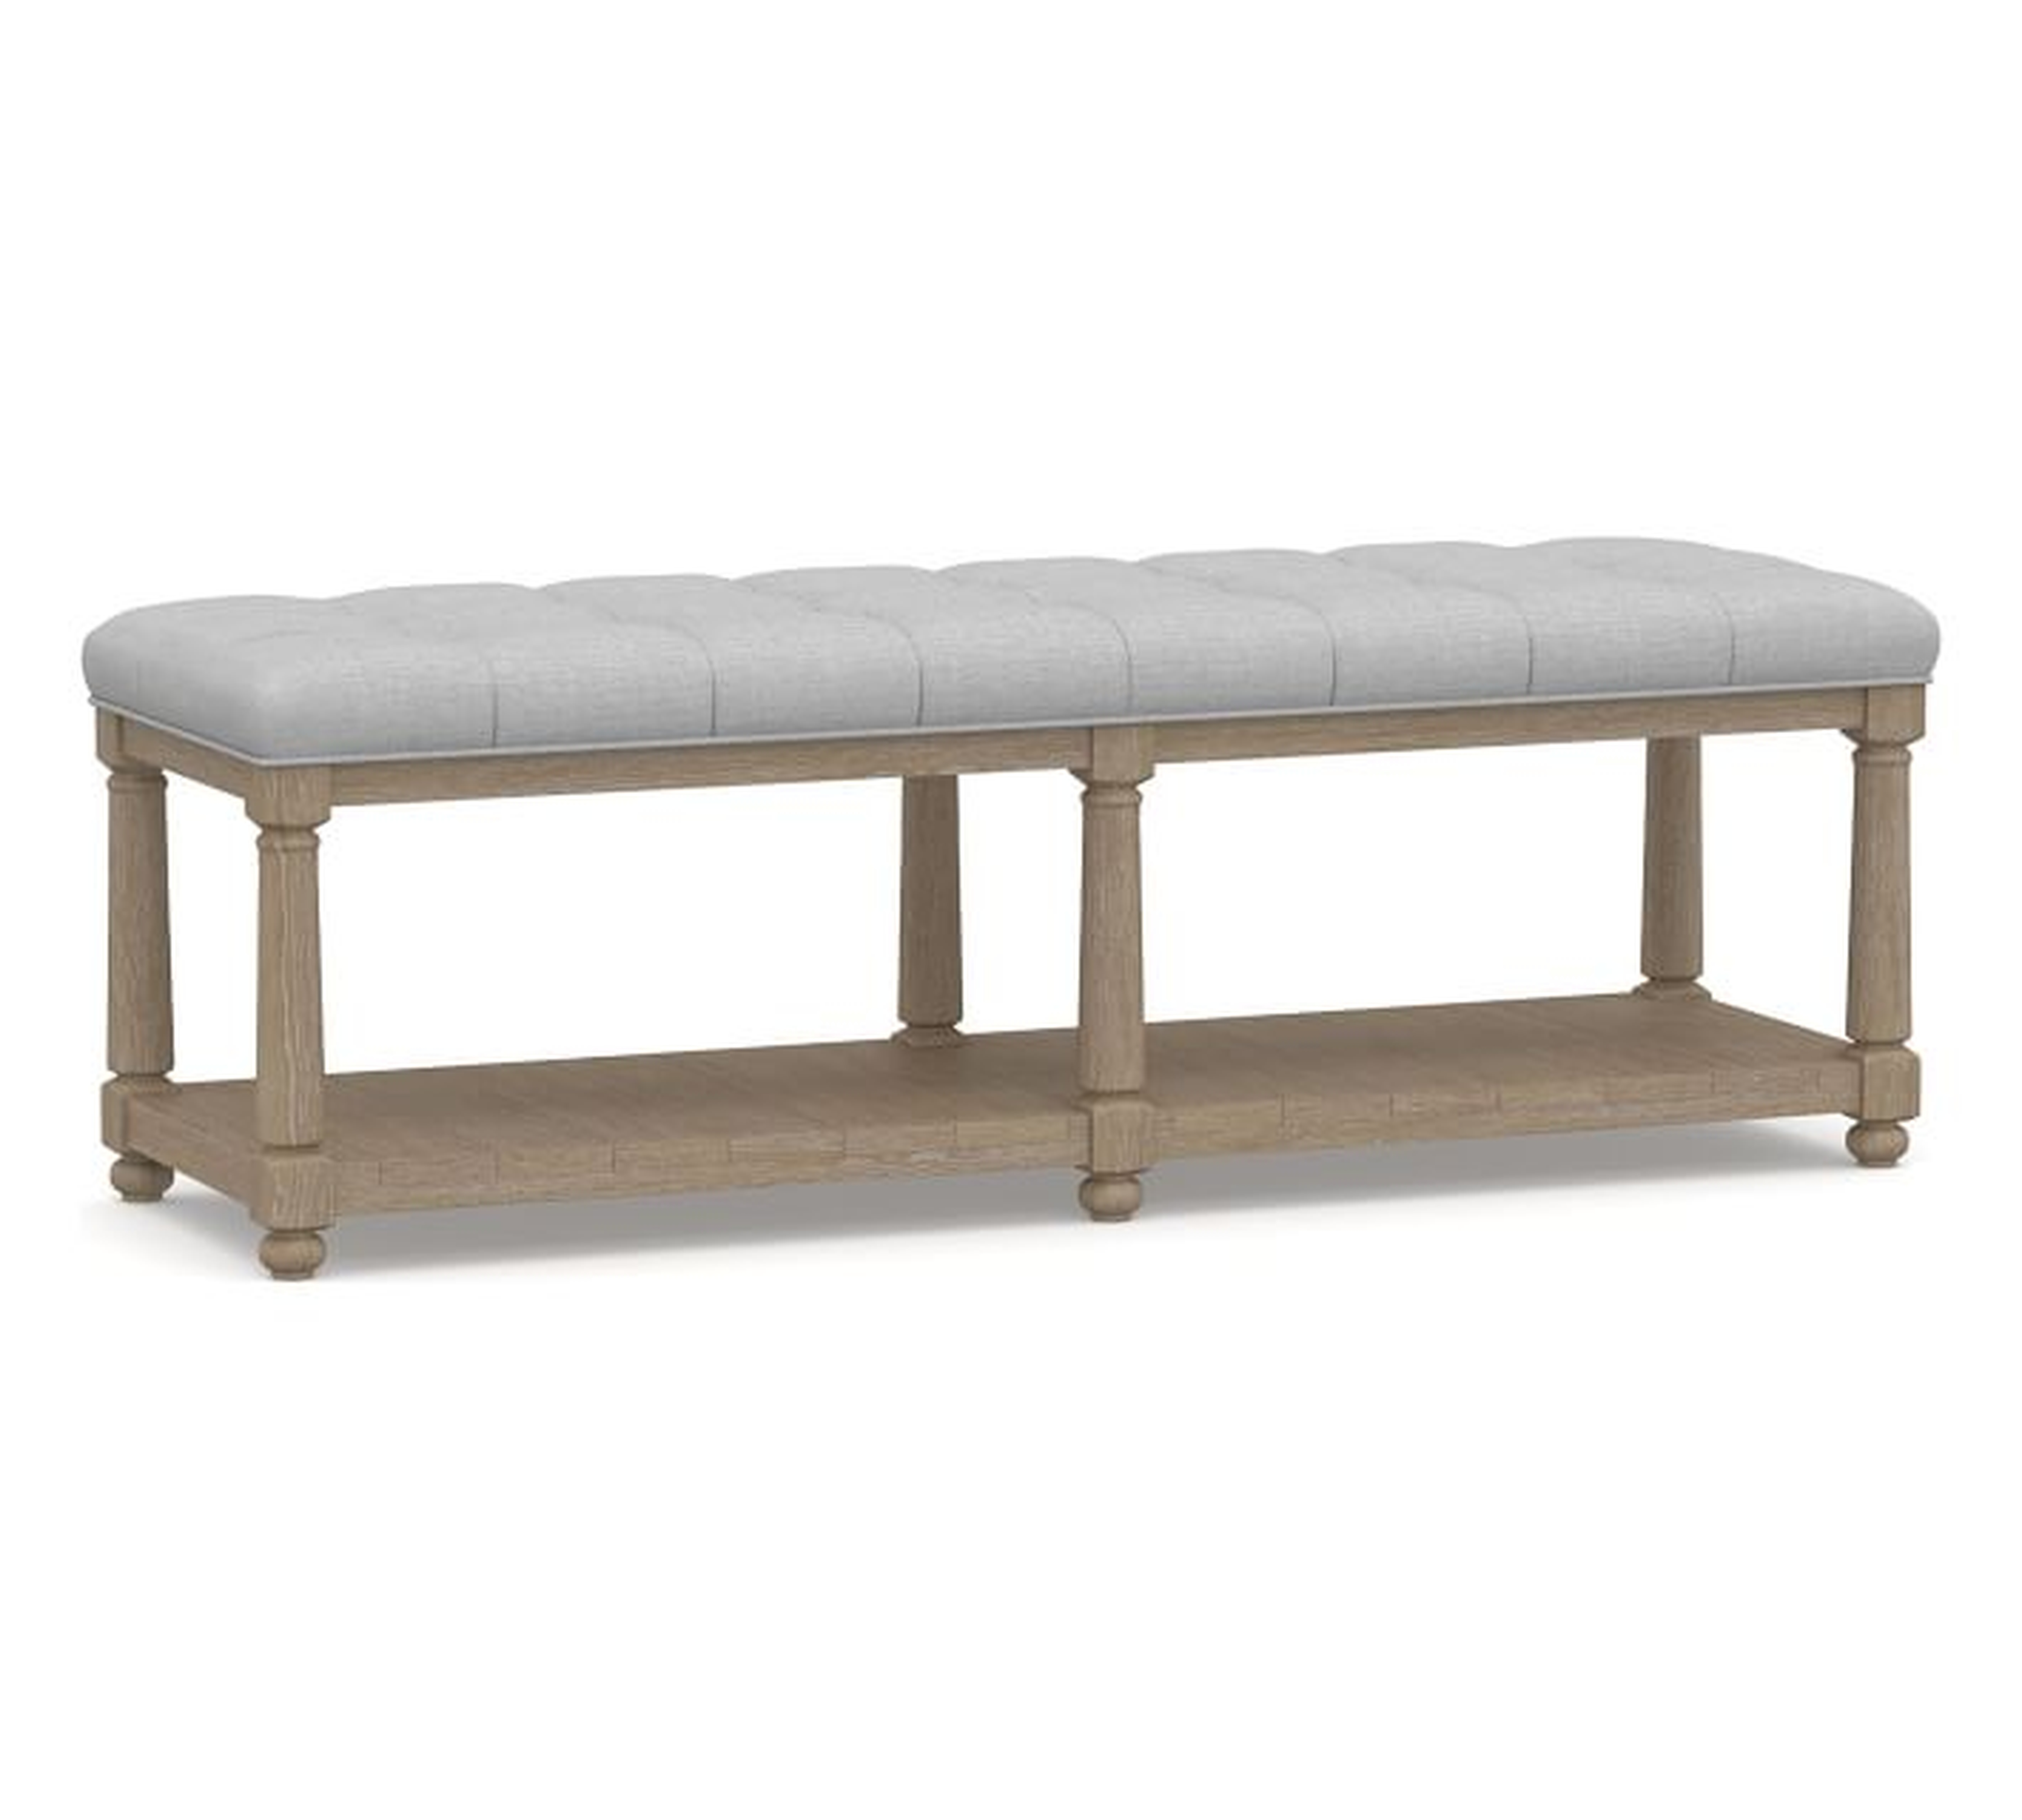 Berlin Tufted Bench, Performance Chateau Basketweave Light Gray - Pottery Barn